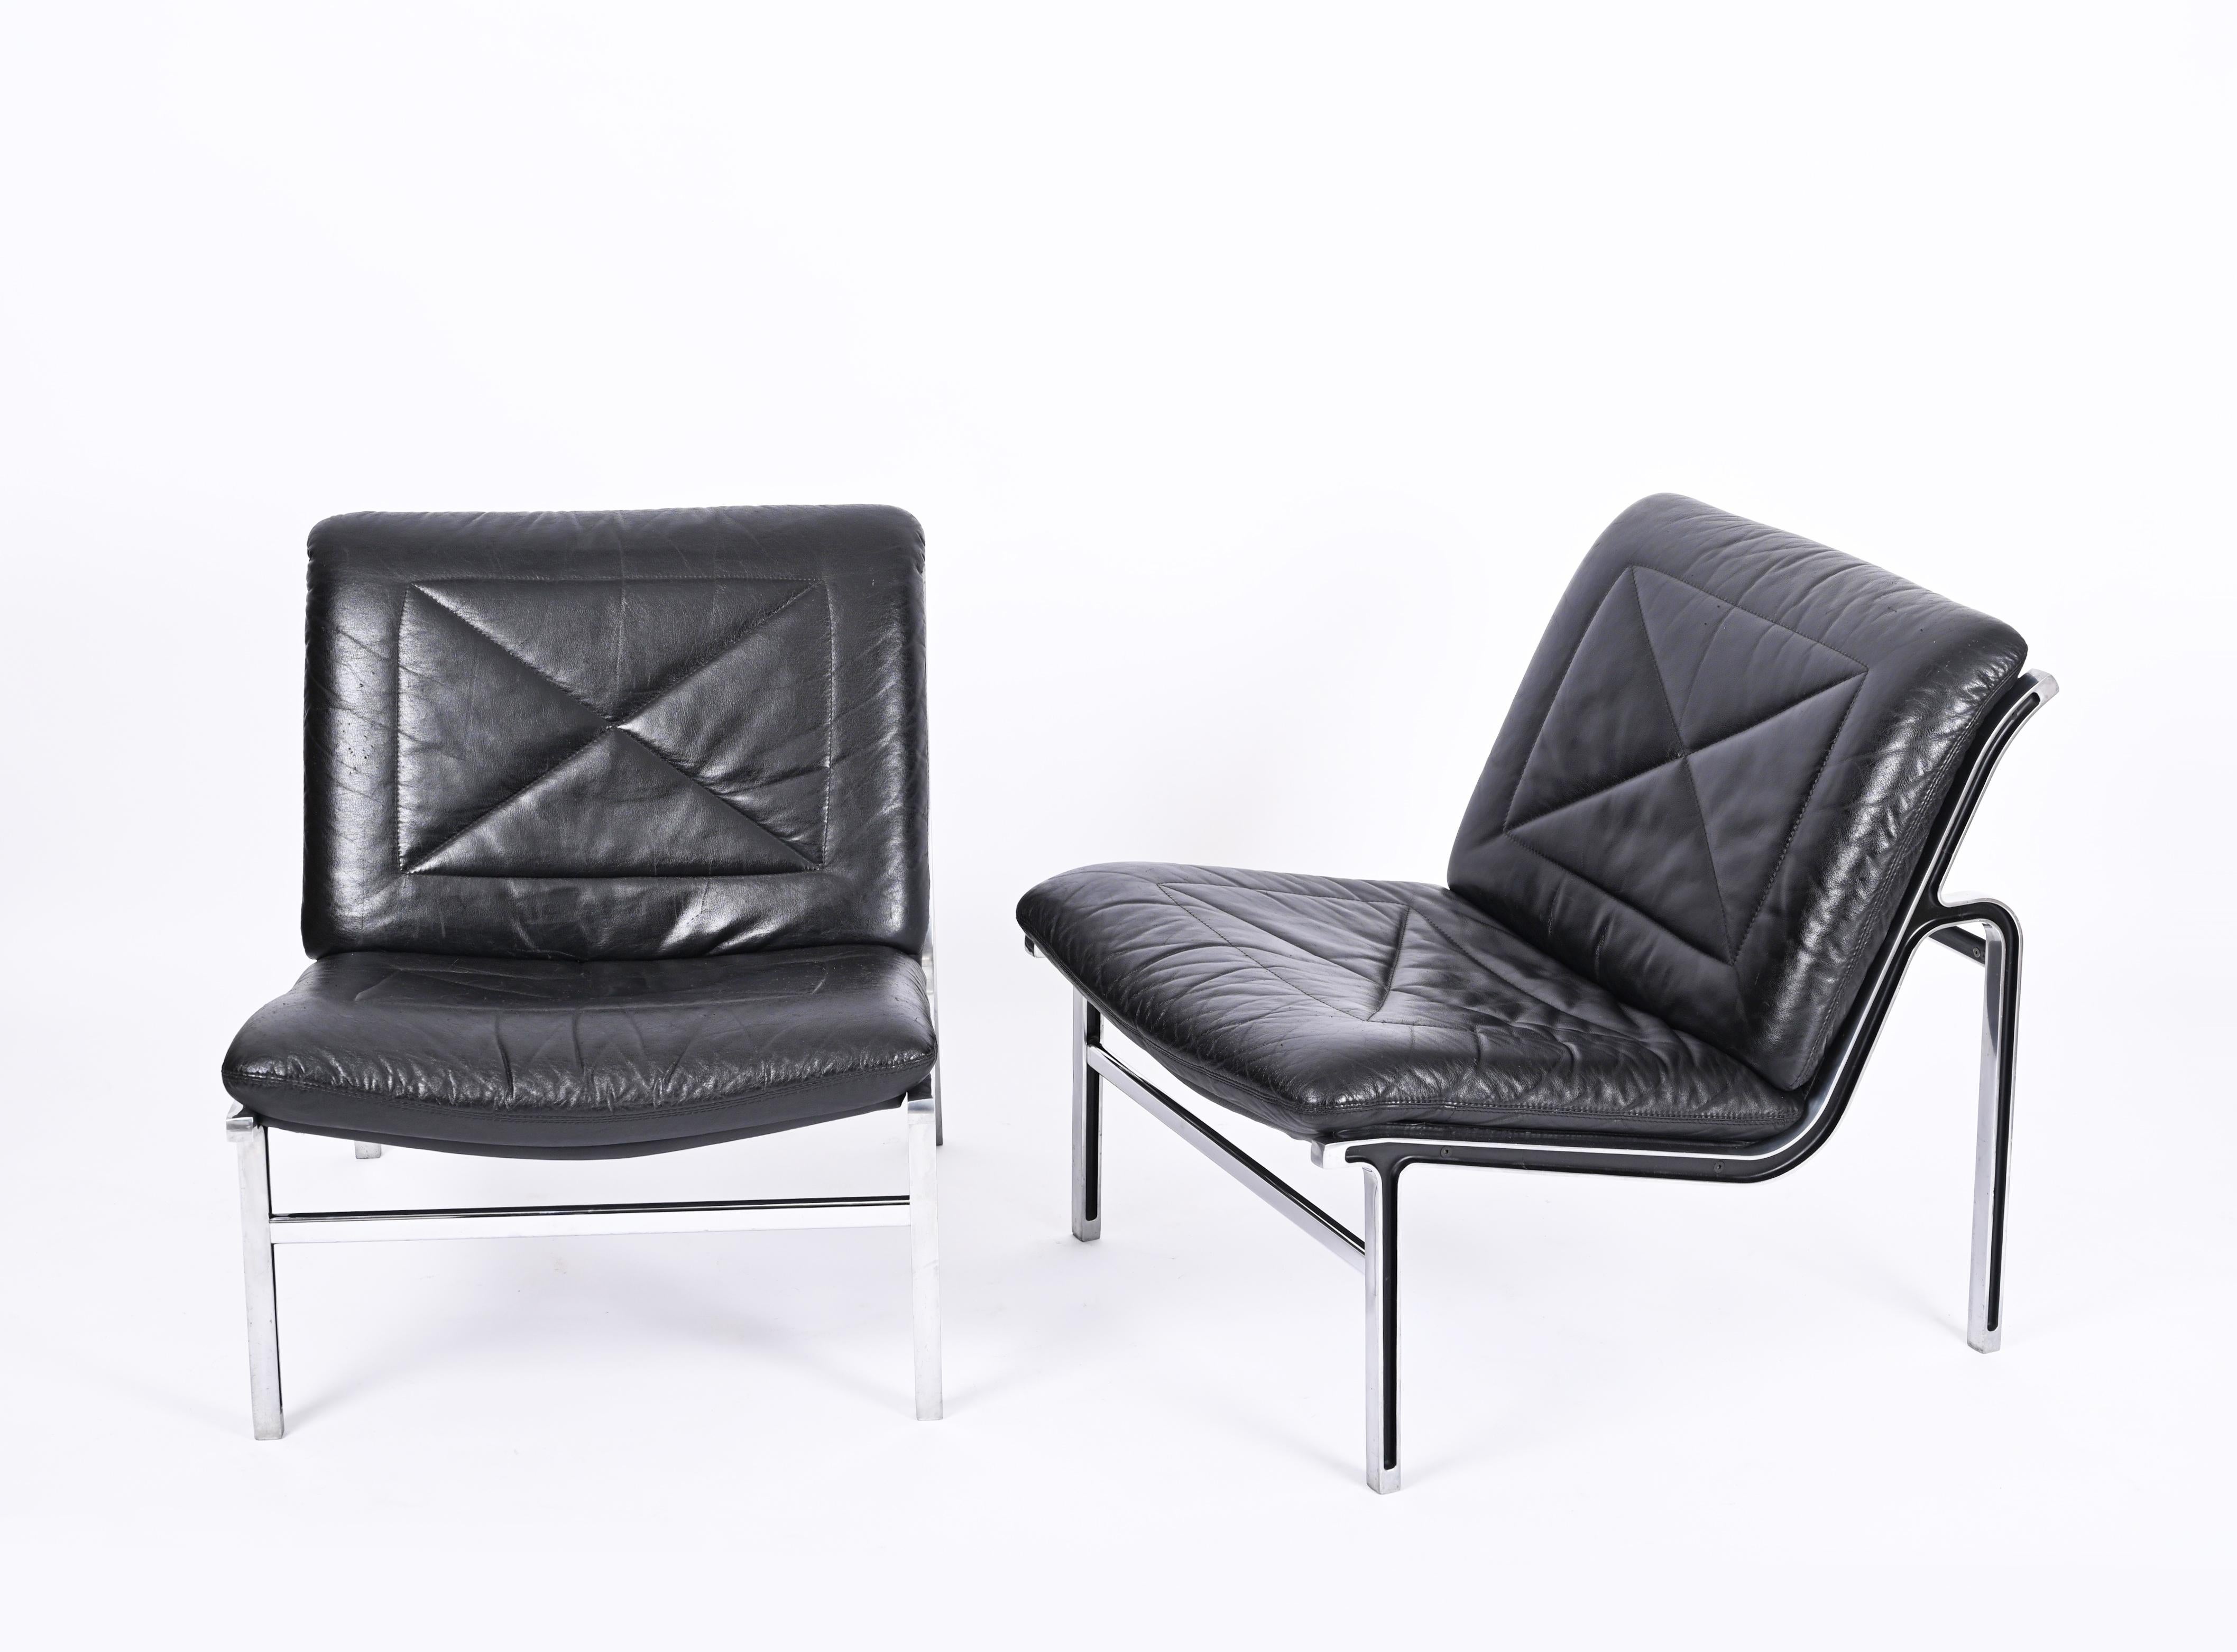 Wonderful pair of of easy chairs in black leather by Andre Vandenbeuck for Straessle, Switzerland 1960s.
The structure is made in a mix of chromed and black enameled steel with the seat in a wonderful black leather. Functional and light appearance